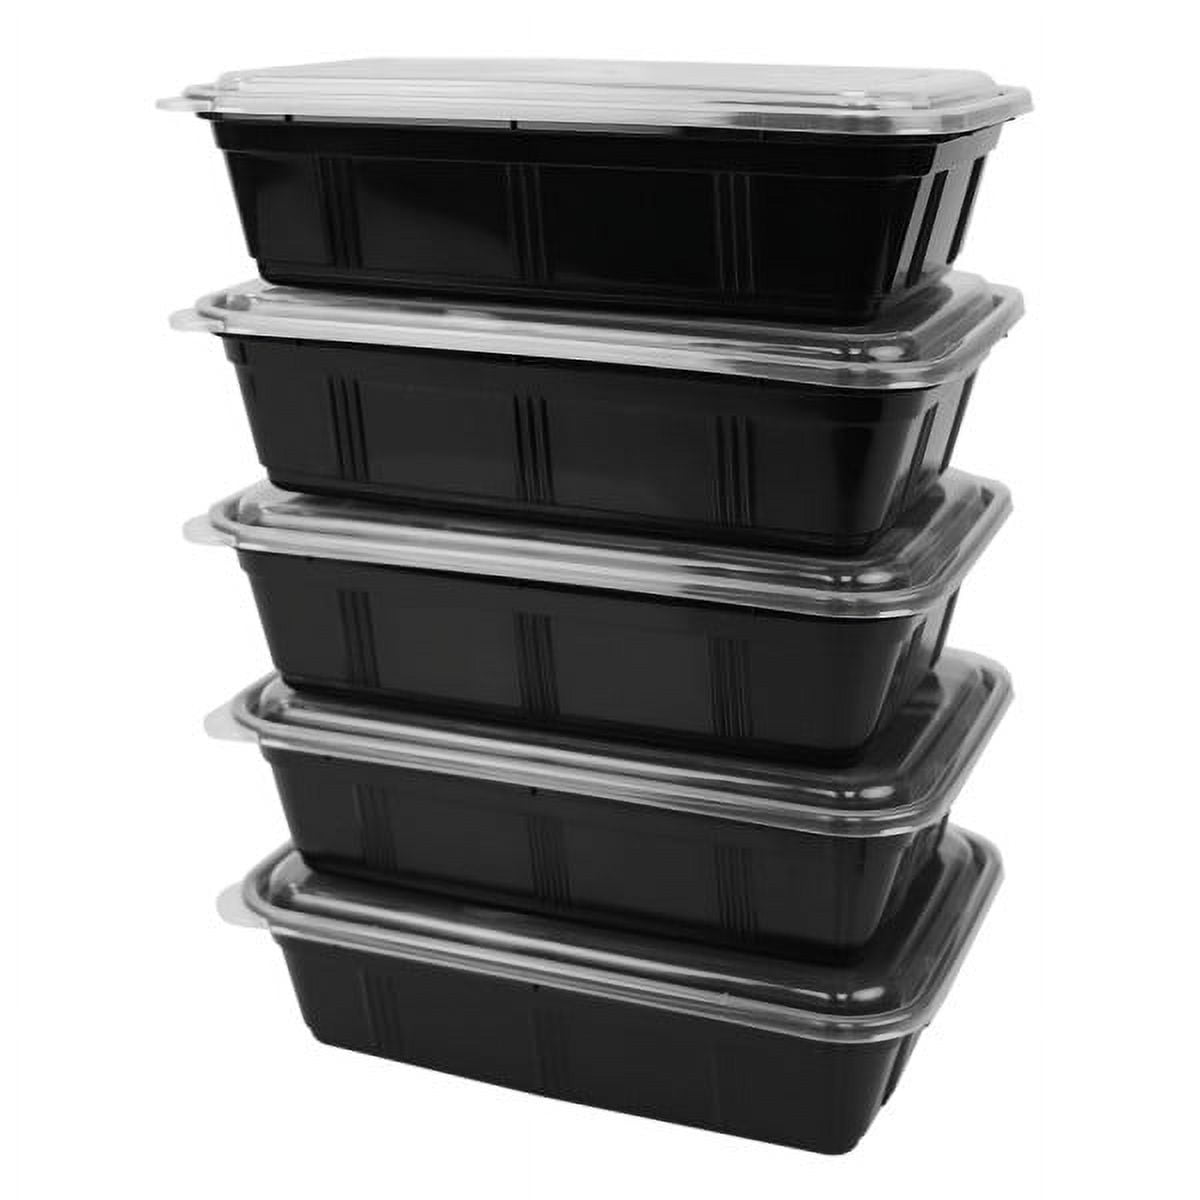 Home Basic 10 Piece BPA-Free Plastic Meal Prep Containers, Black, Each -  Kroger